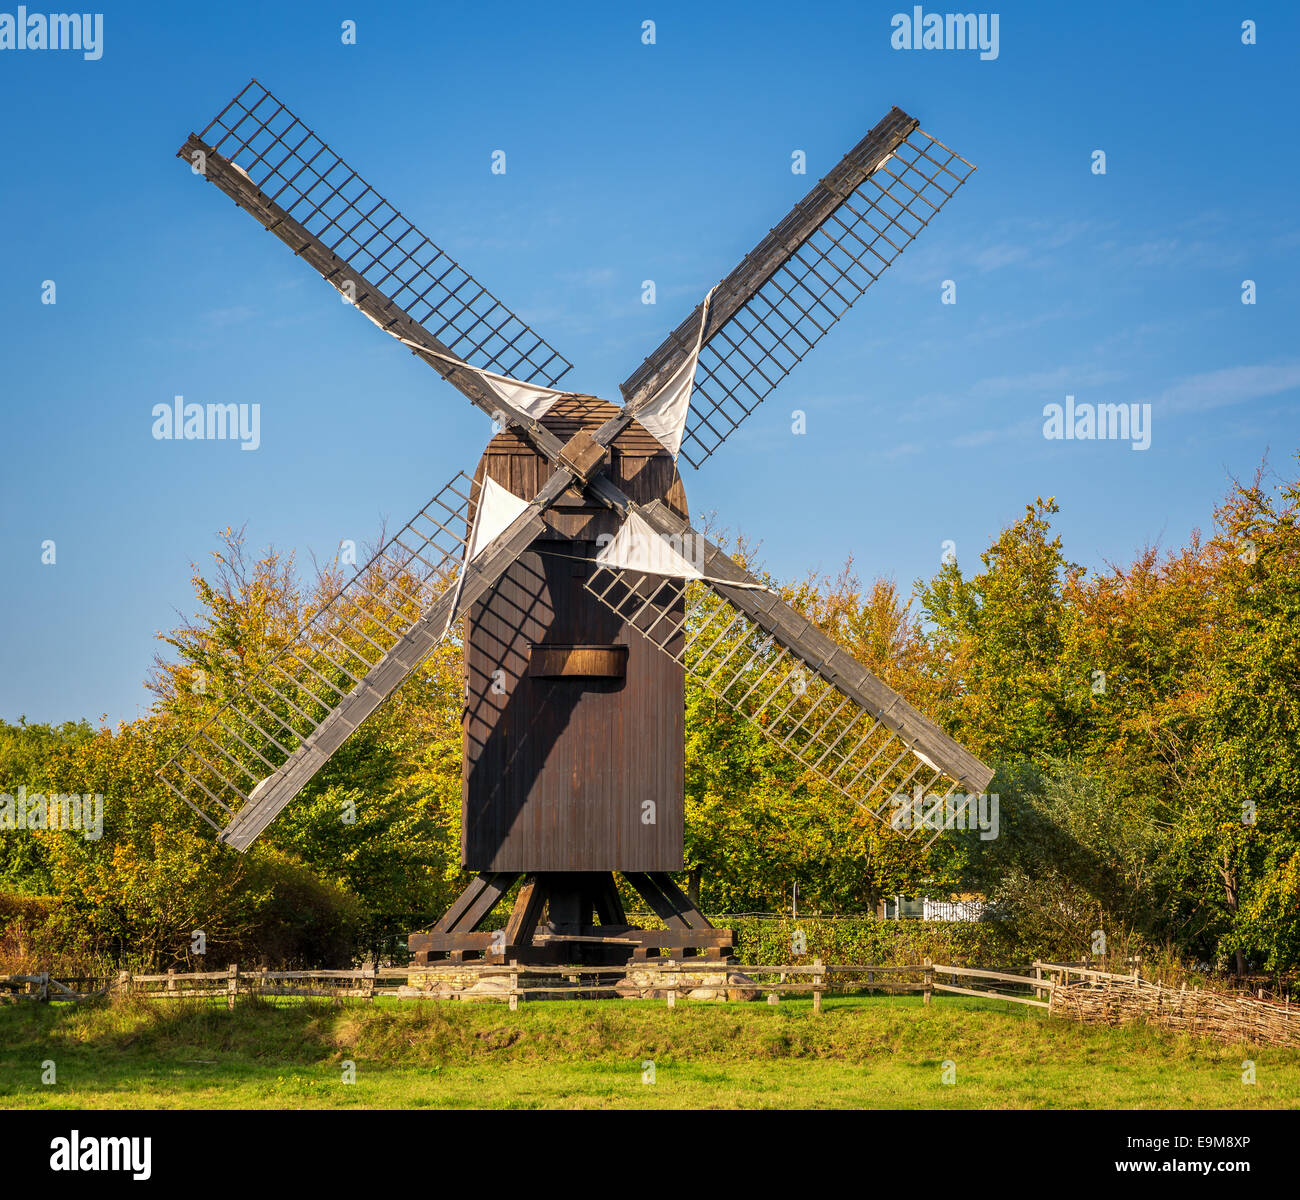 Typical Danish windmill from the 16th century, The Open Air Museum, Frilandsmuseet, Lyngby, Denmark Stock Photo